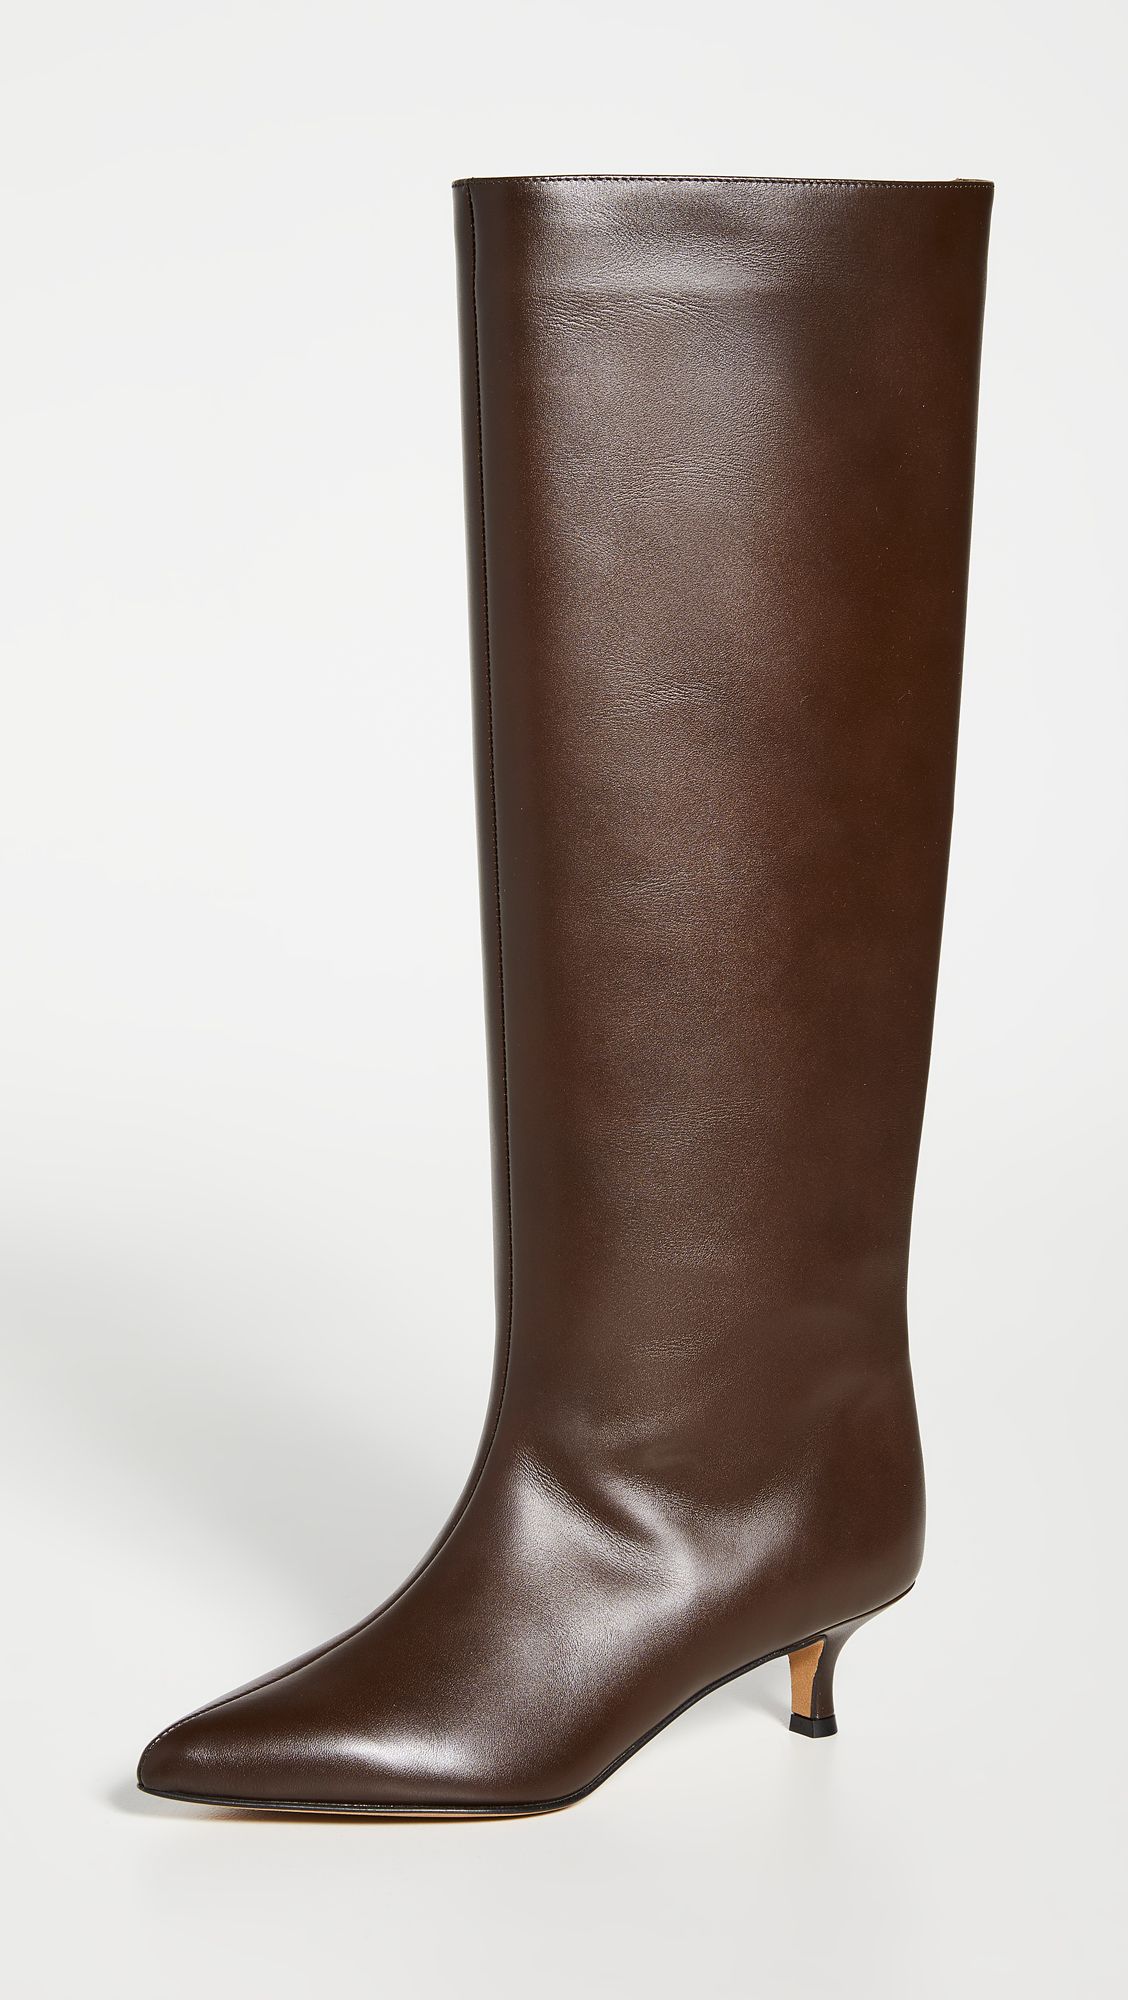 30 Pairs of Knee-High Boots That Are Perfect in Every Way | Who What Wear